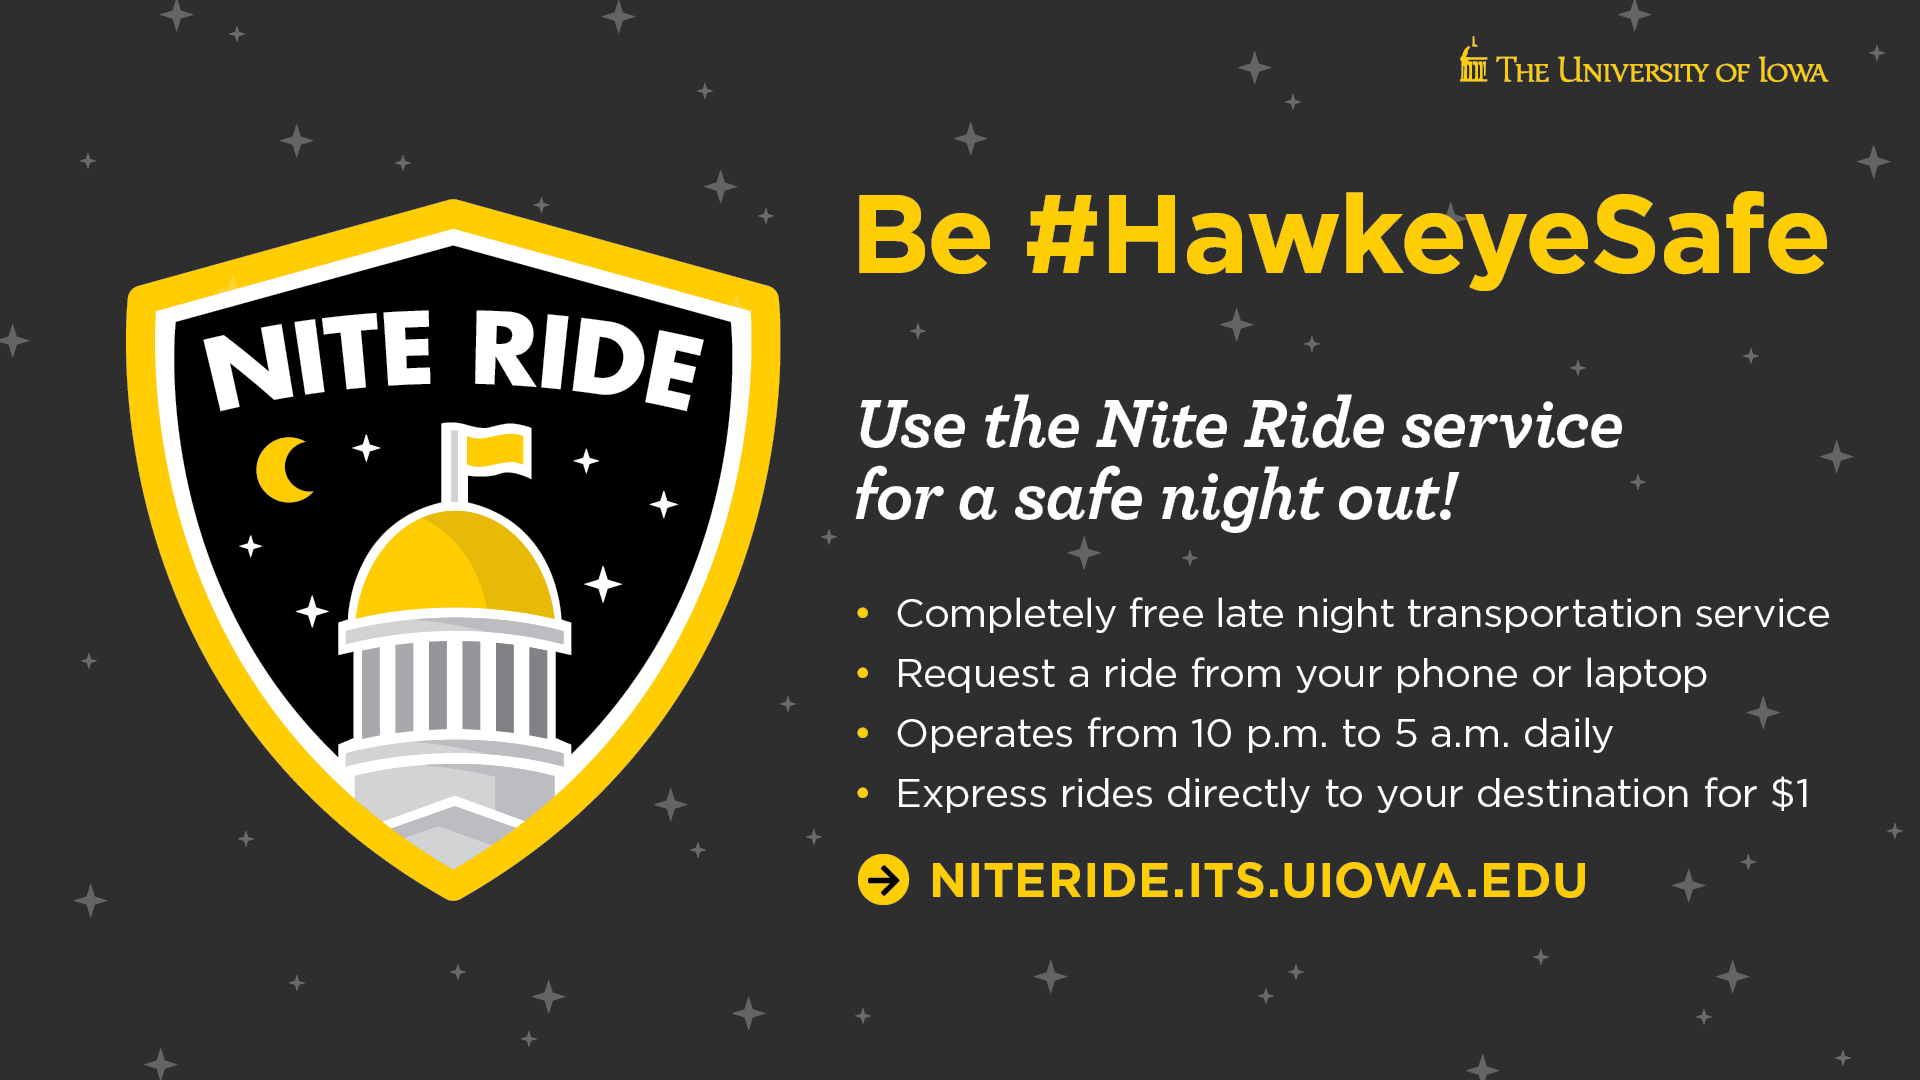 Use the Nite Ride service for a safe night out!